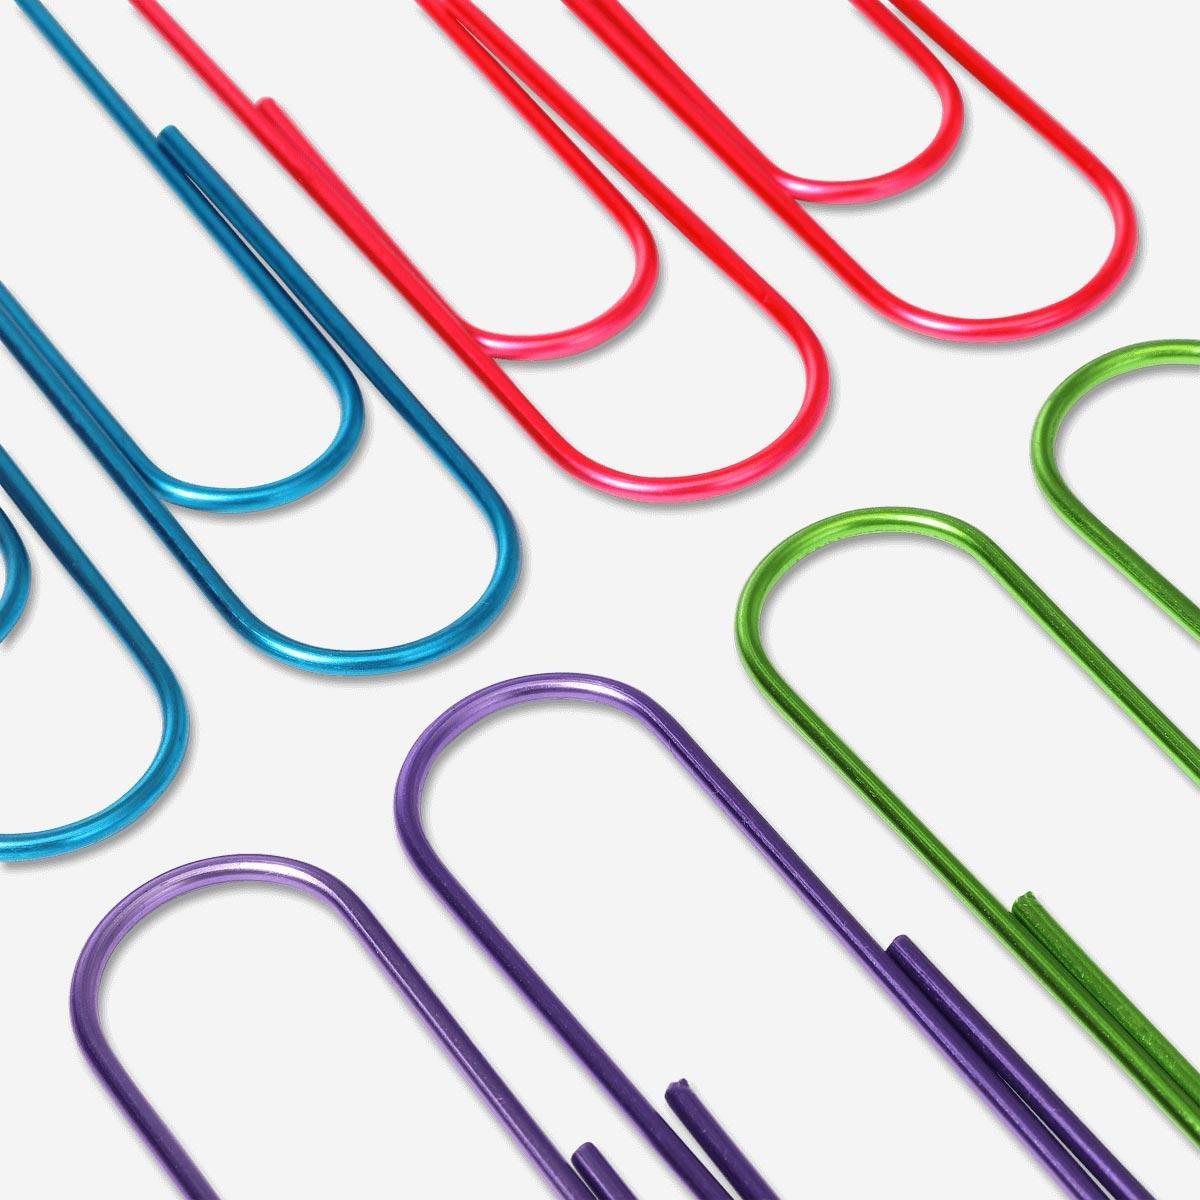 Giant metal paper clips